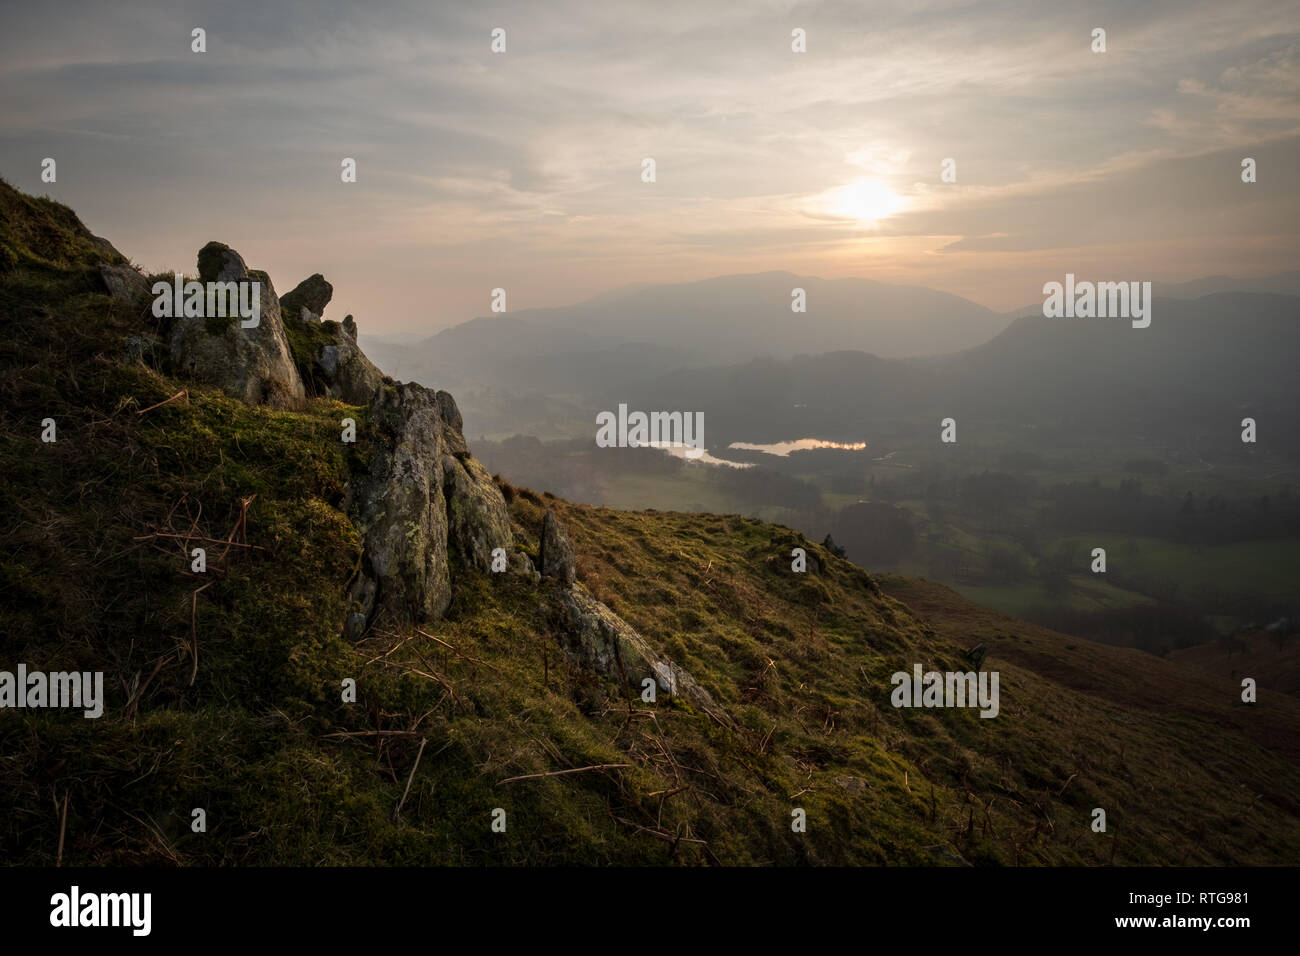 Sunset over Elter Water seen from the summit of Loughrigg Fell, Wetherlam is in the distance, Lake District, UK Stock Photo